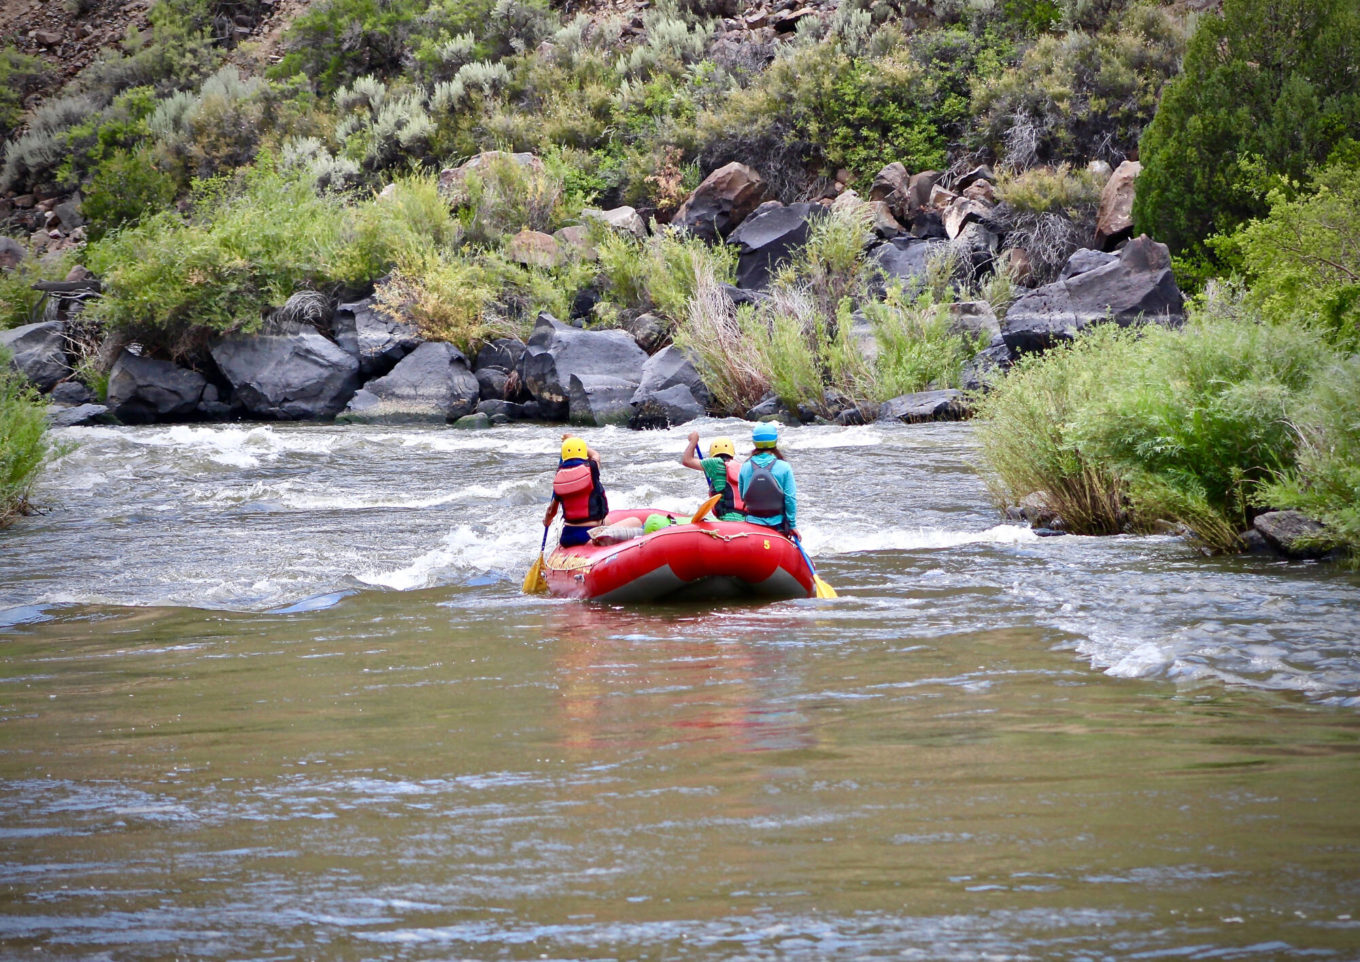 Rafters on wild and scenic rivers